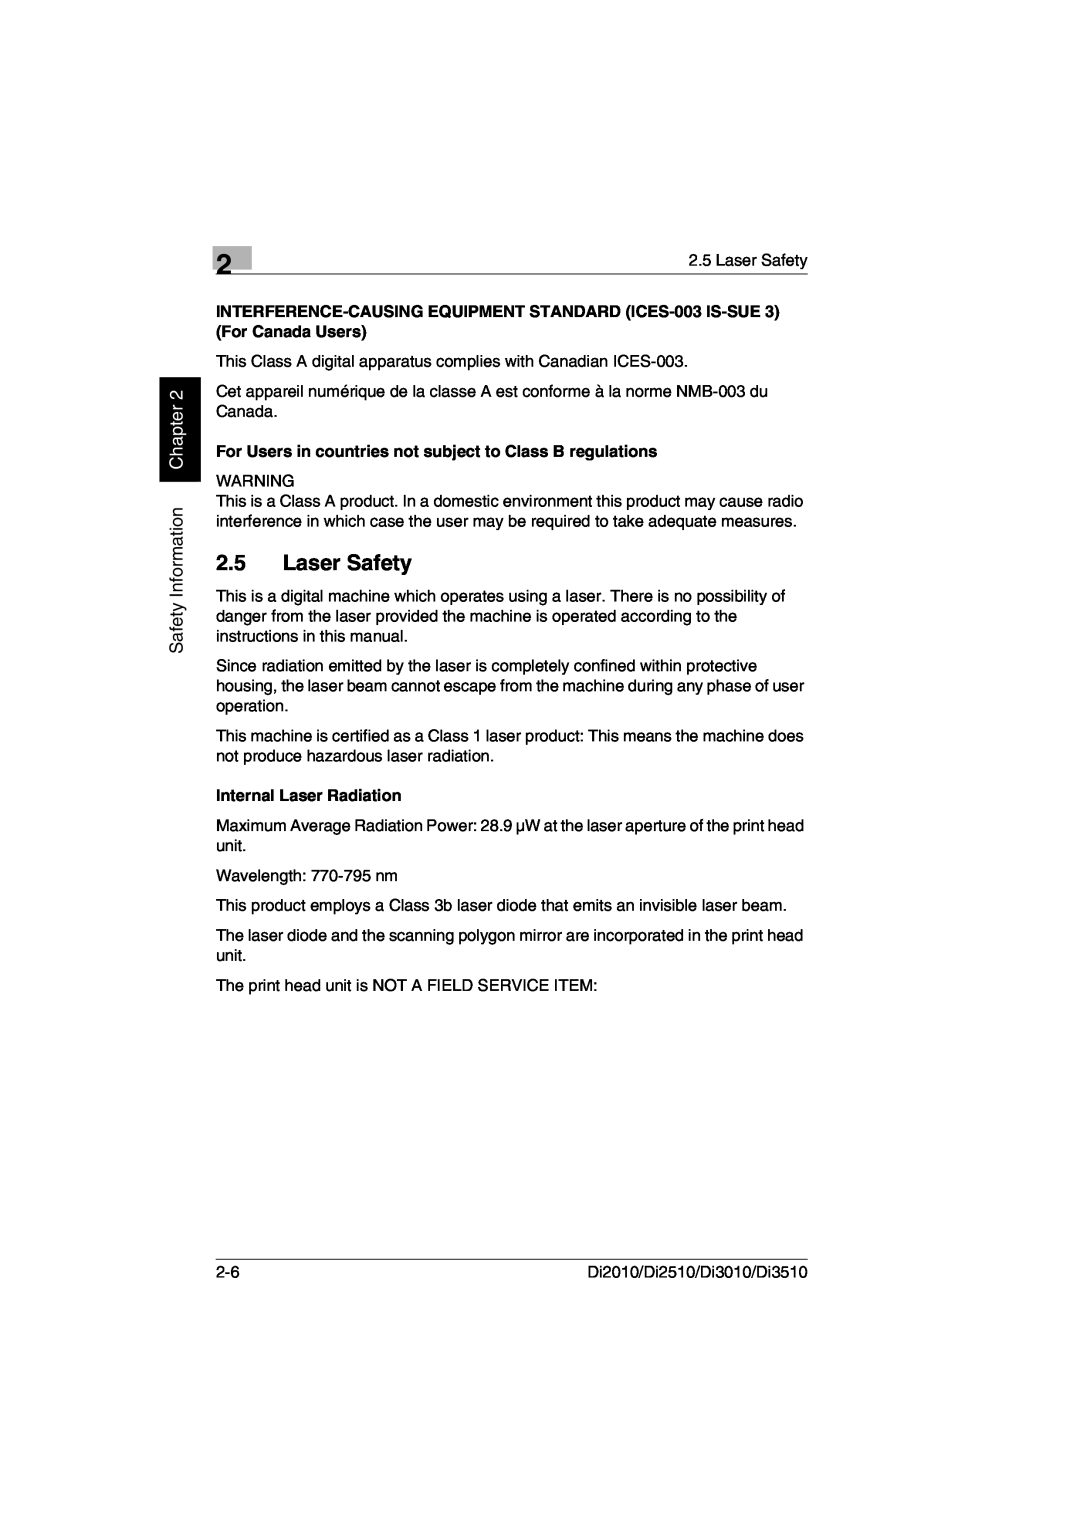 Minolta DI2010, DI2510 Laser Safety, Safety Information Chapter, For Users in countries not subject to Class B regulations 